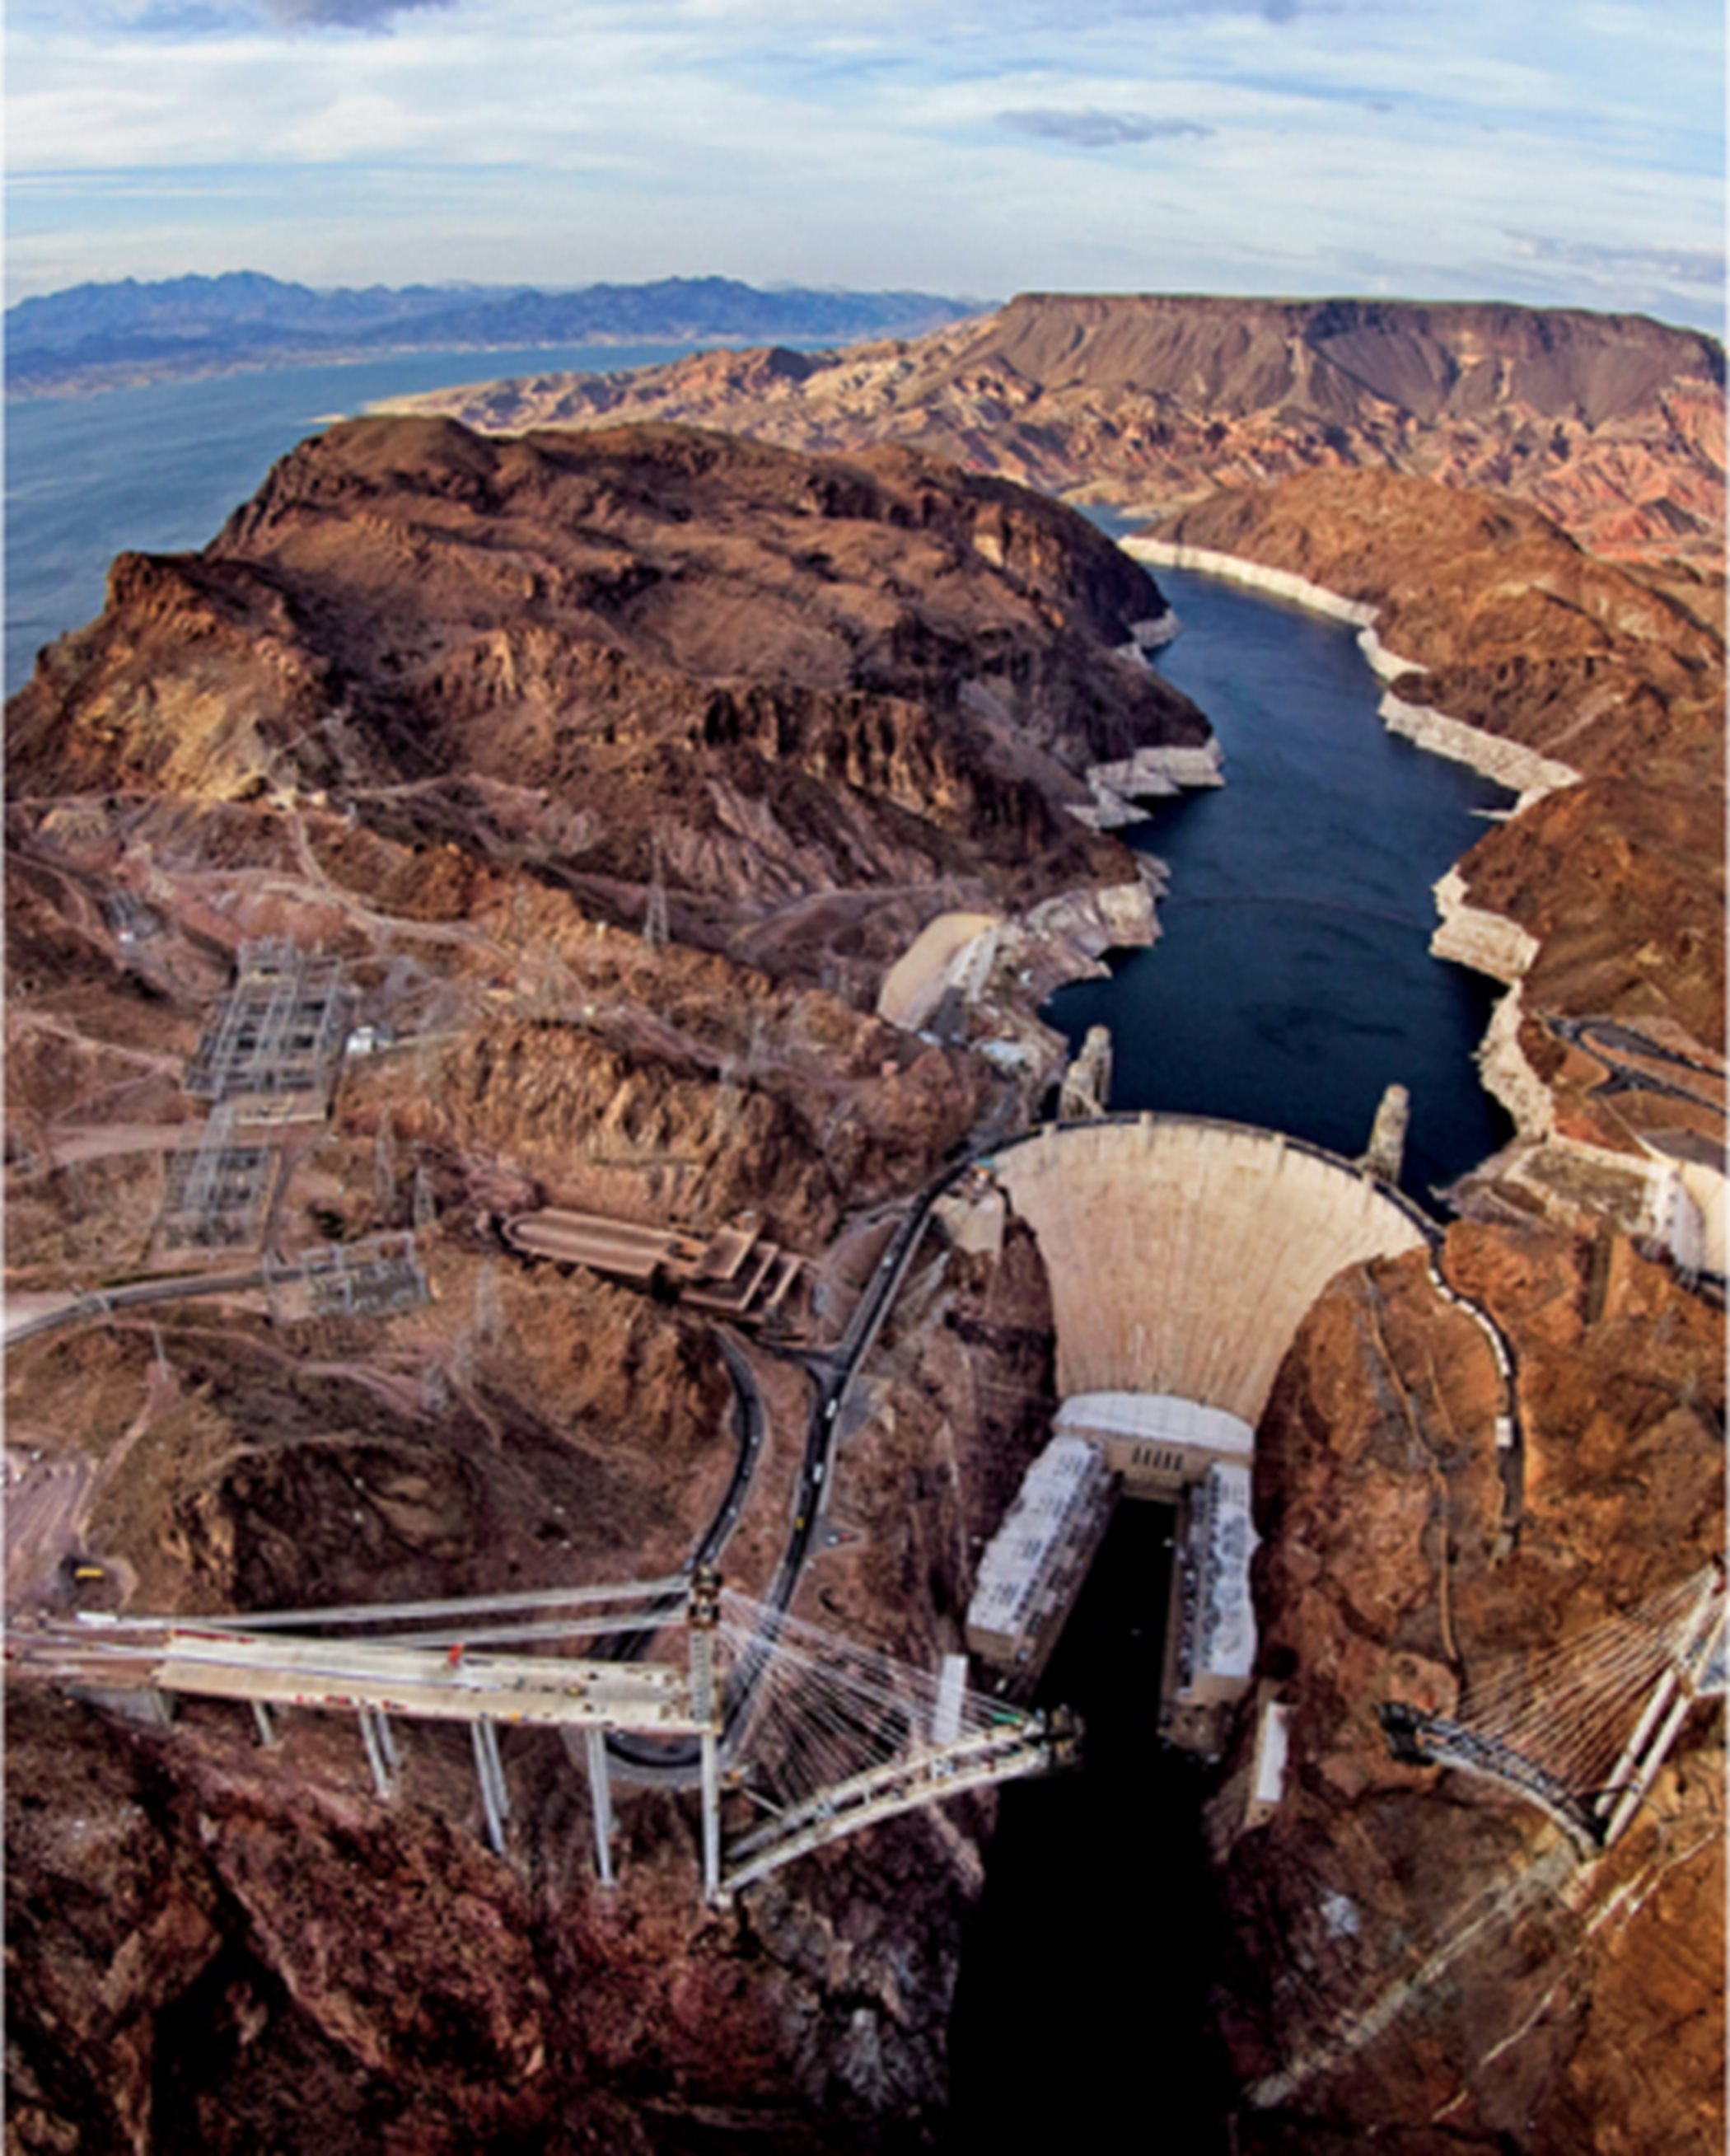 The McAuley Historic Hoover Dam and Colorado River